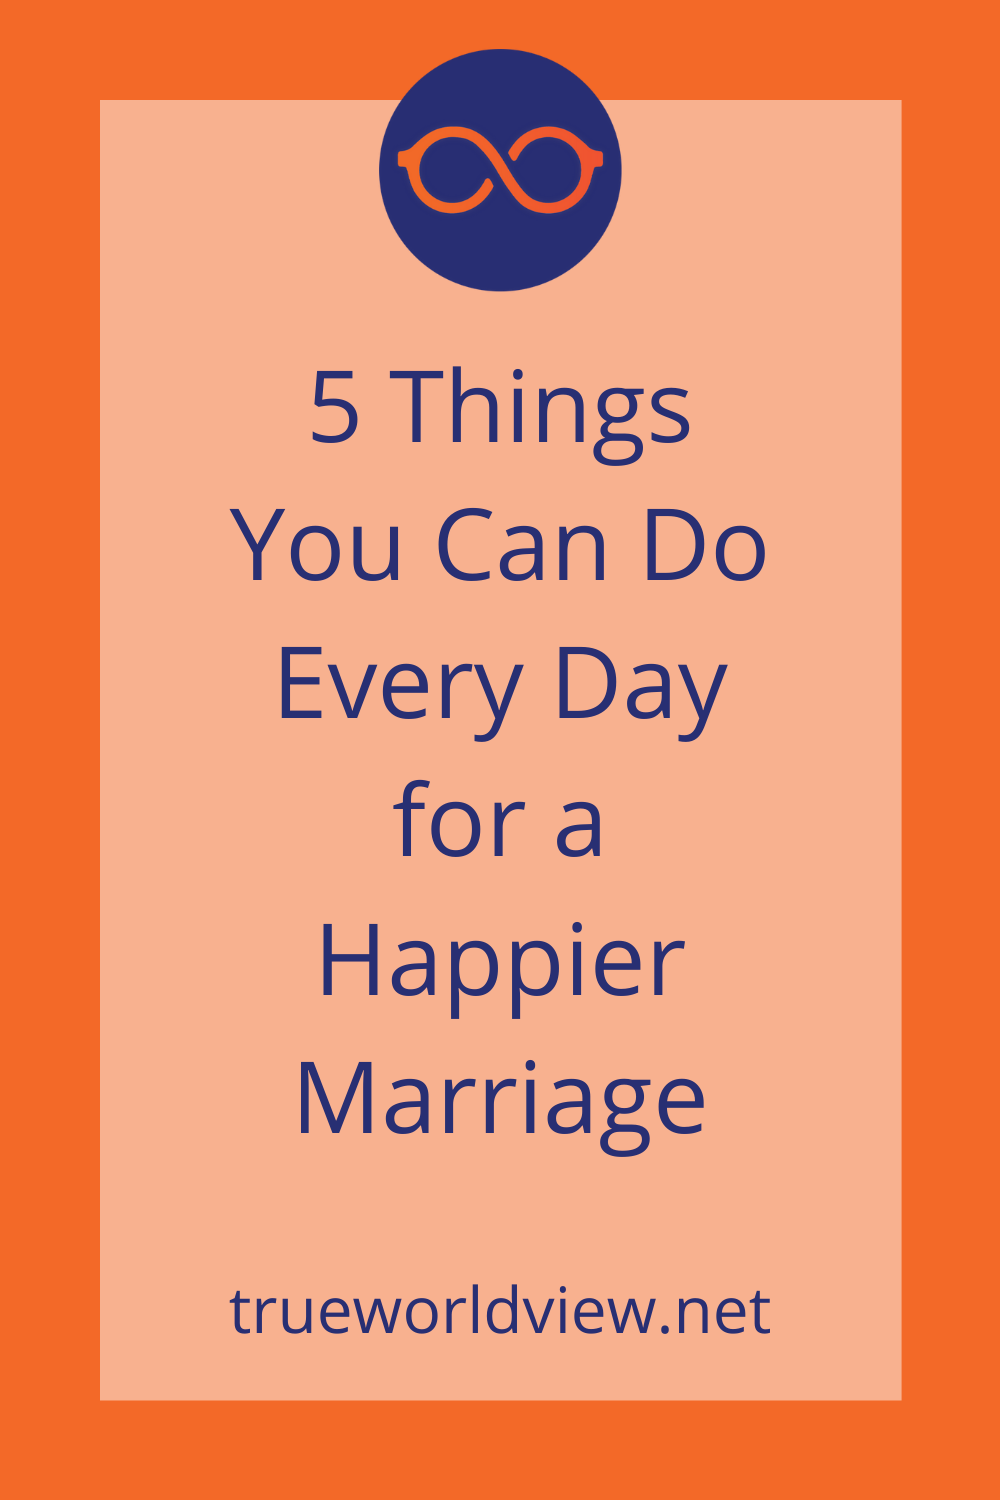 Tips for a Happier Marriage